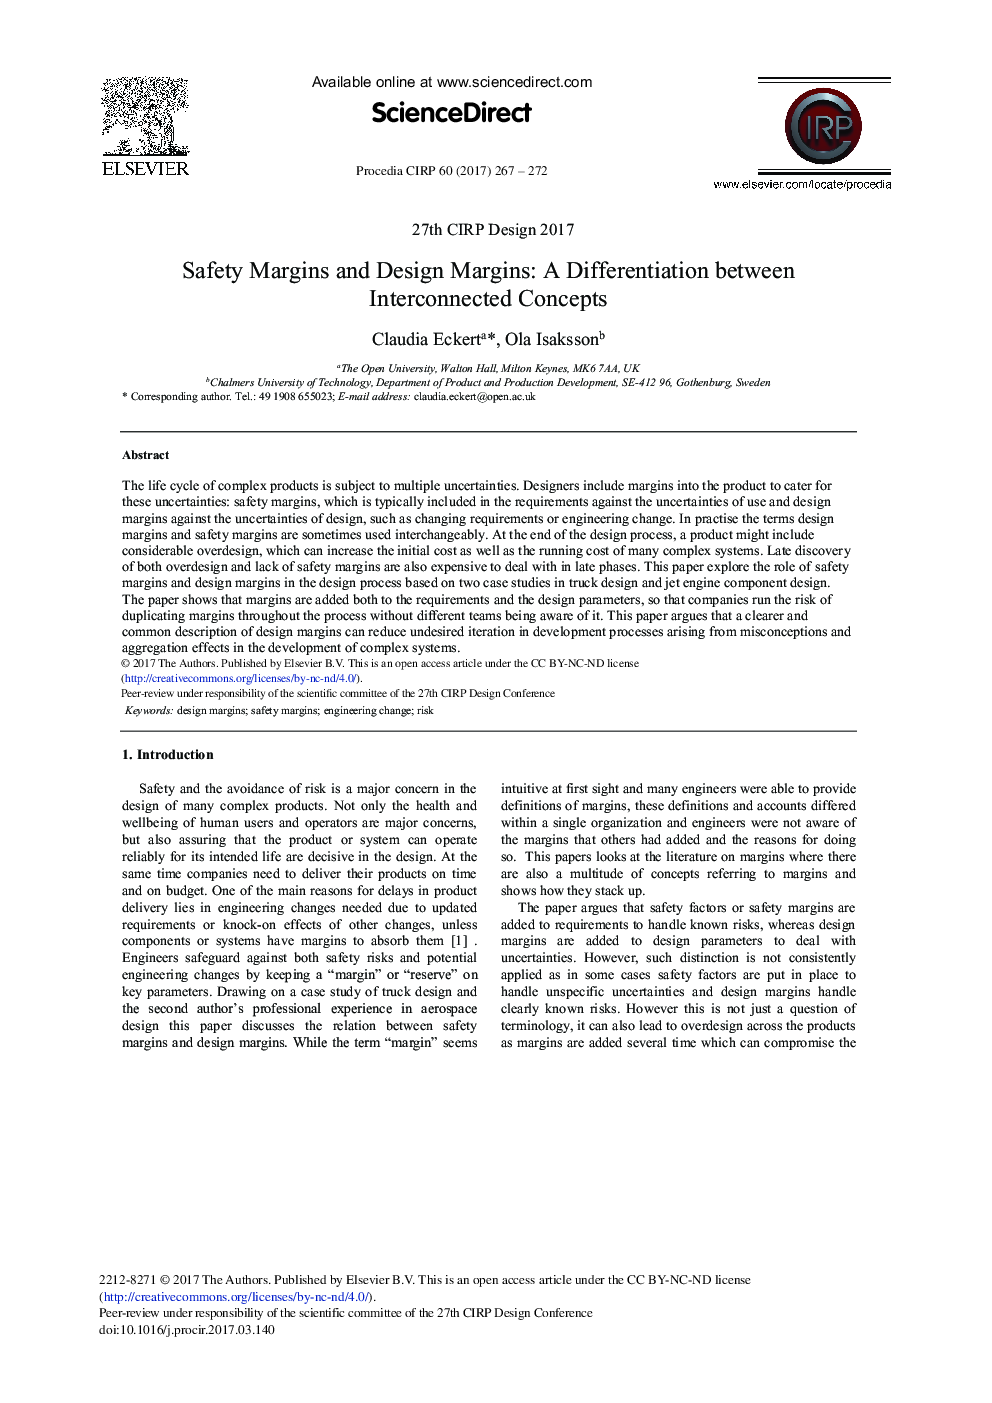 Safety Margins and Design Margins: A Differentiation between Interconnected Concepts